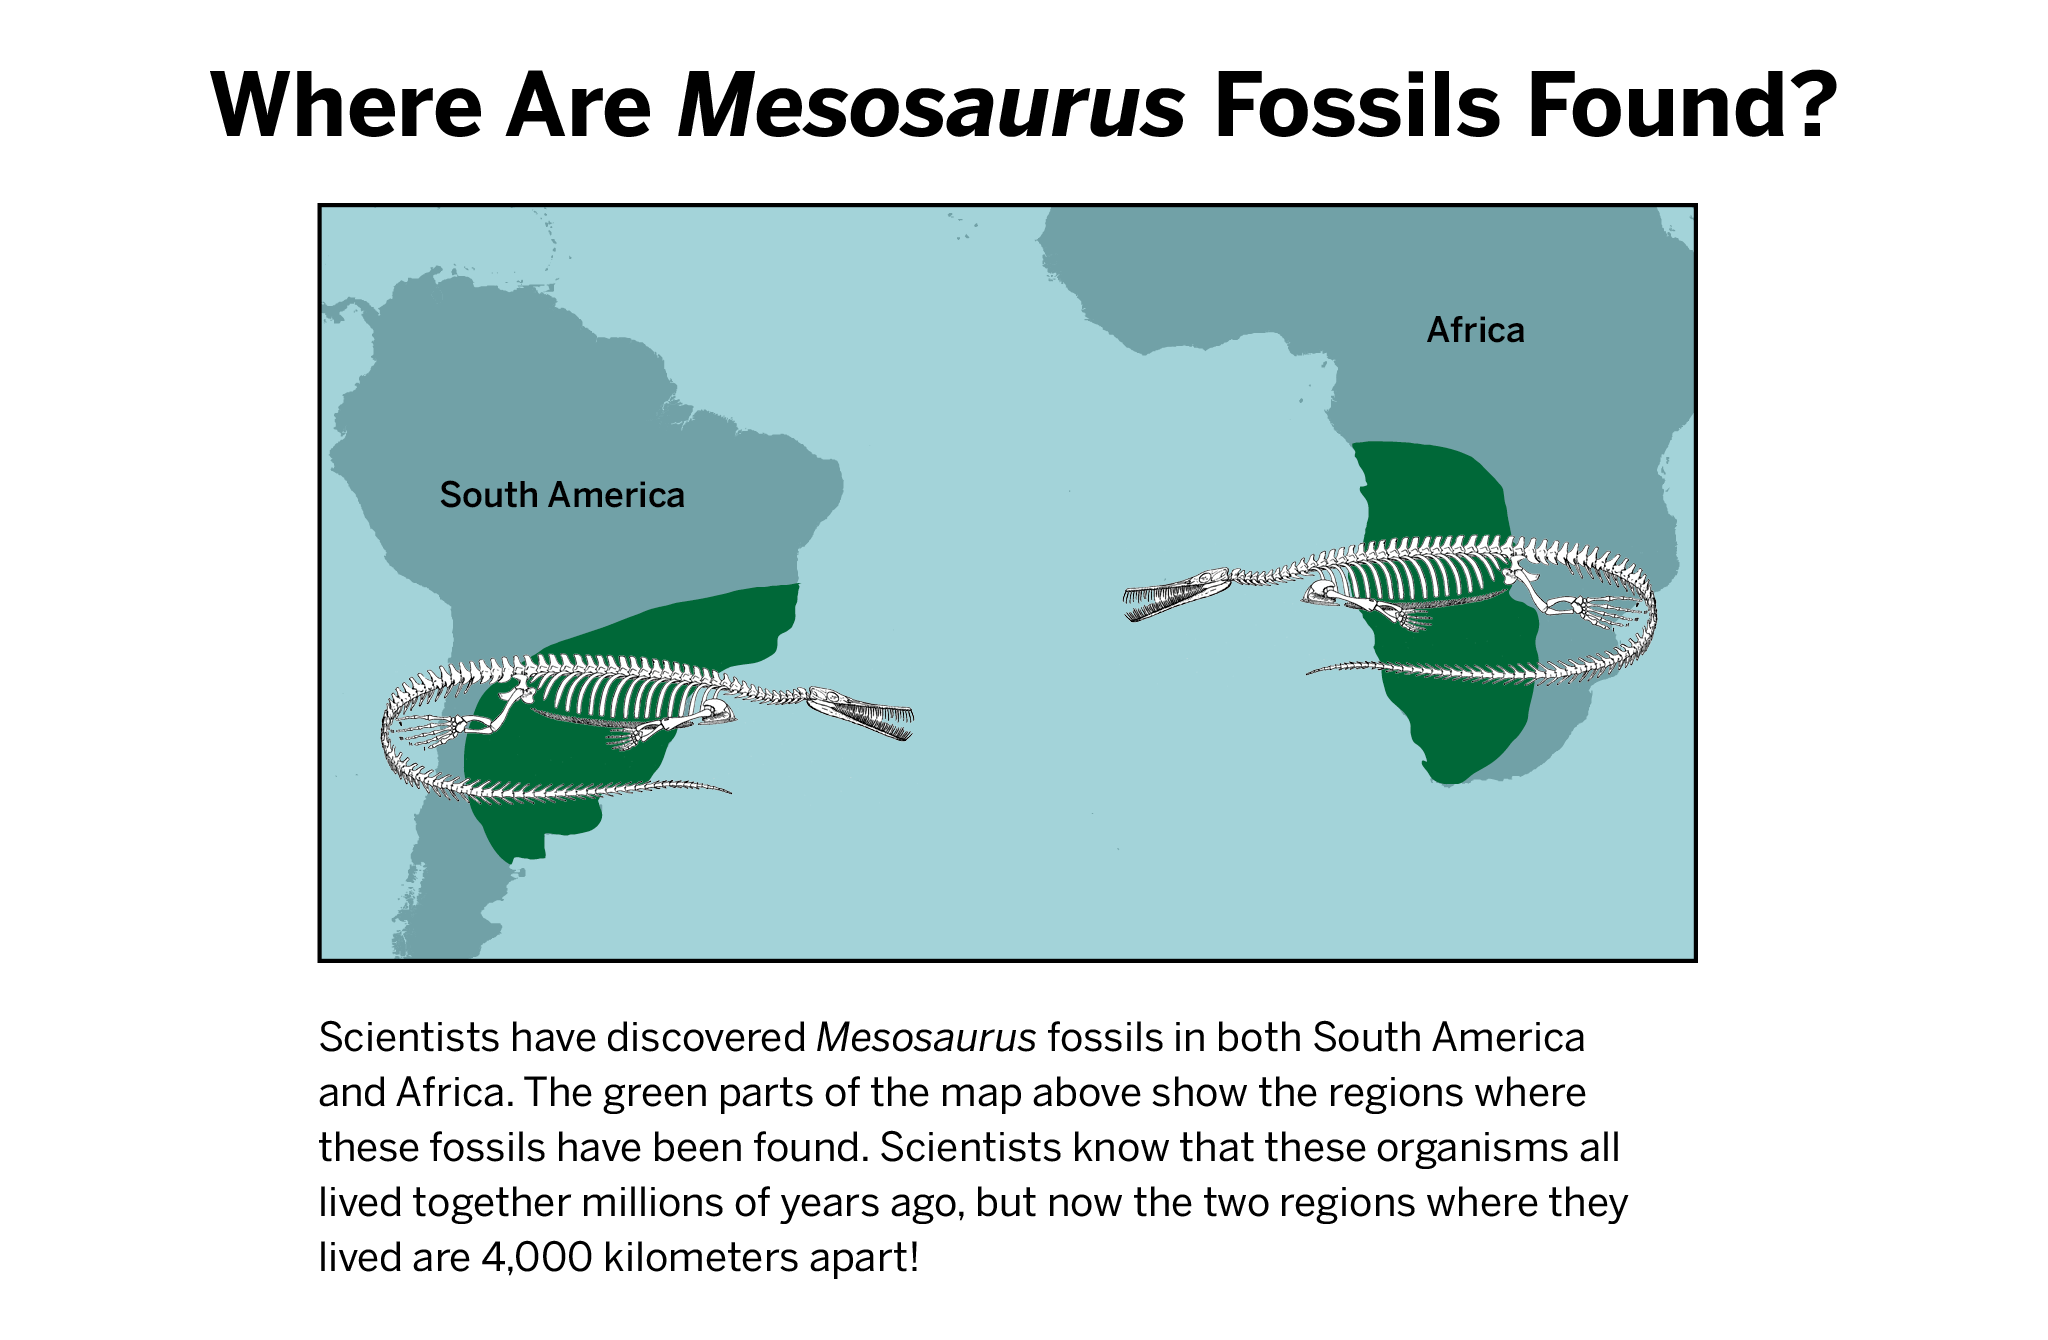 homework ideas about the separation of the mesosaurus fossils